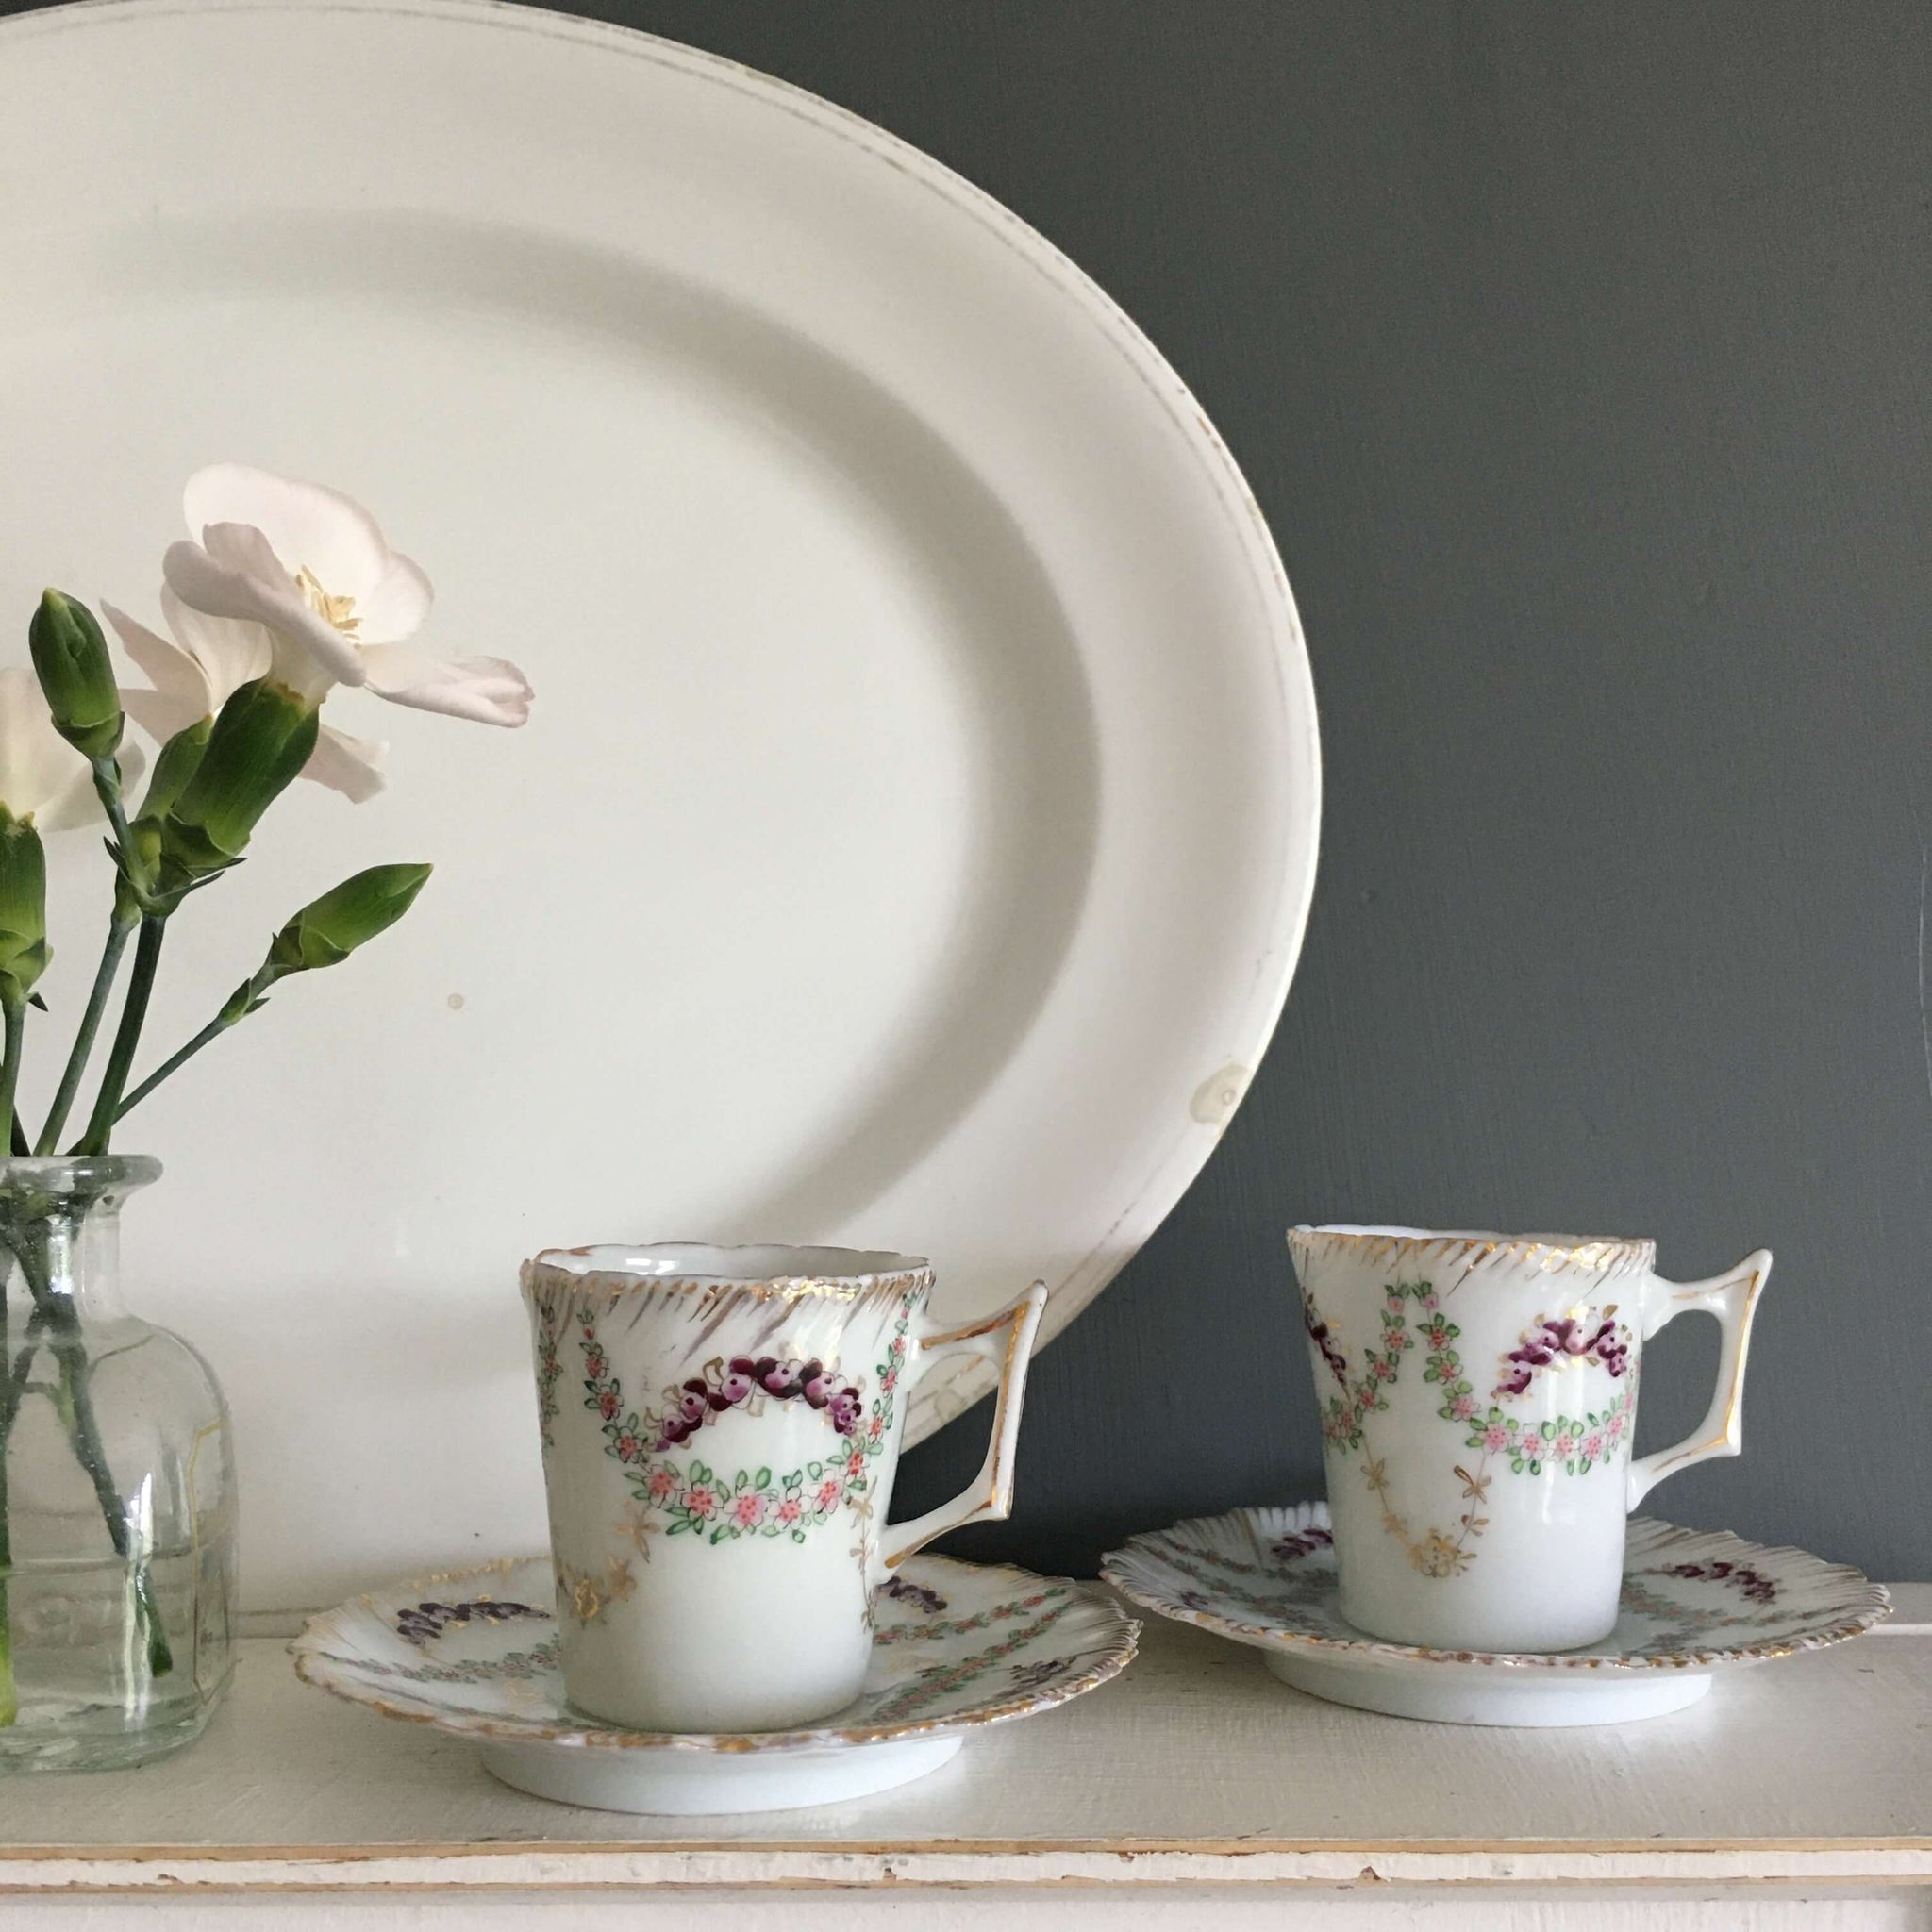 Antique Porcelain Demitasse Collection - 12 Pieces- French Limoges and Japanese Handpainted Floral Sets